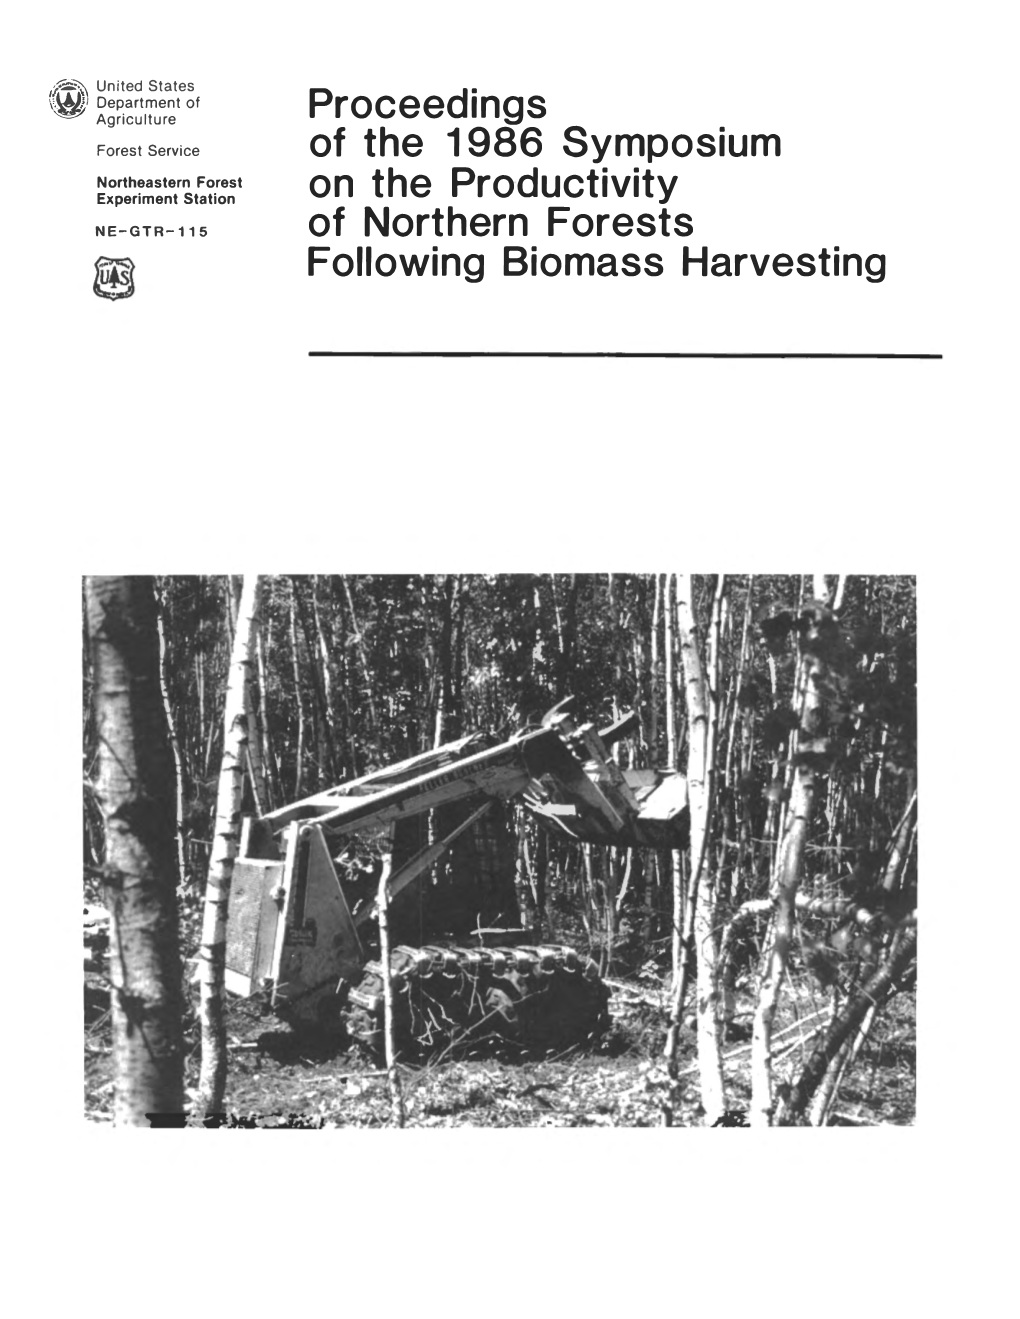 Proceedings of the 1986 Symposium on the Productivity of Northern Forests Following Biomass Harvesting